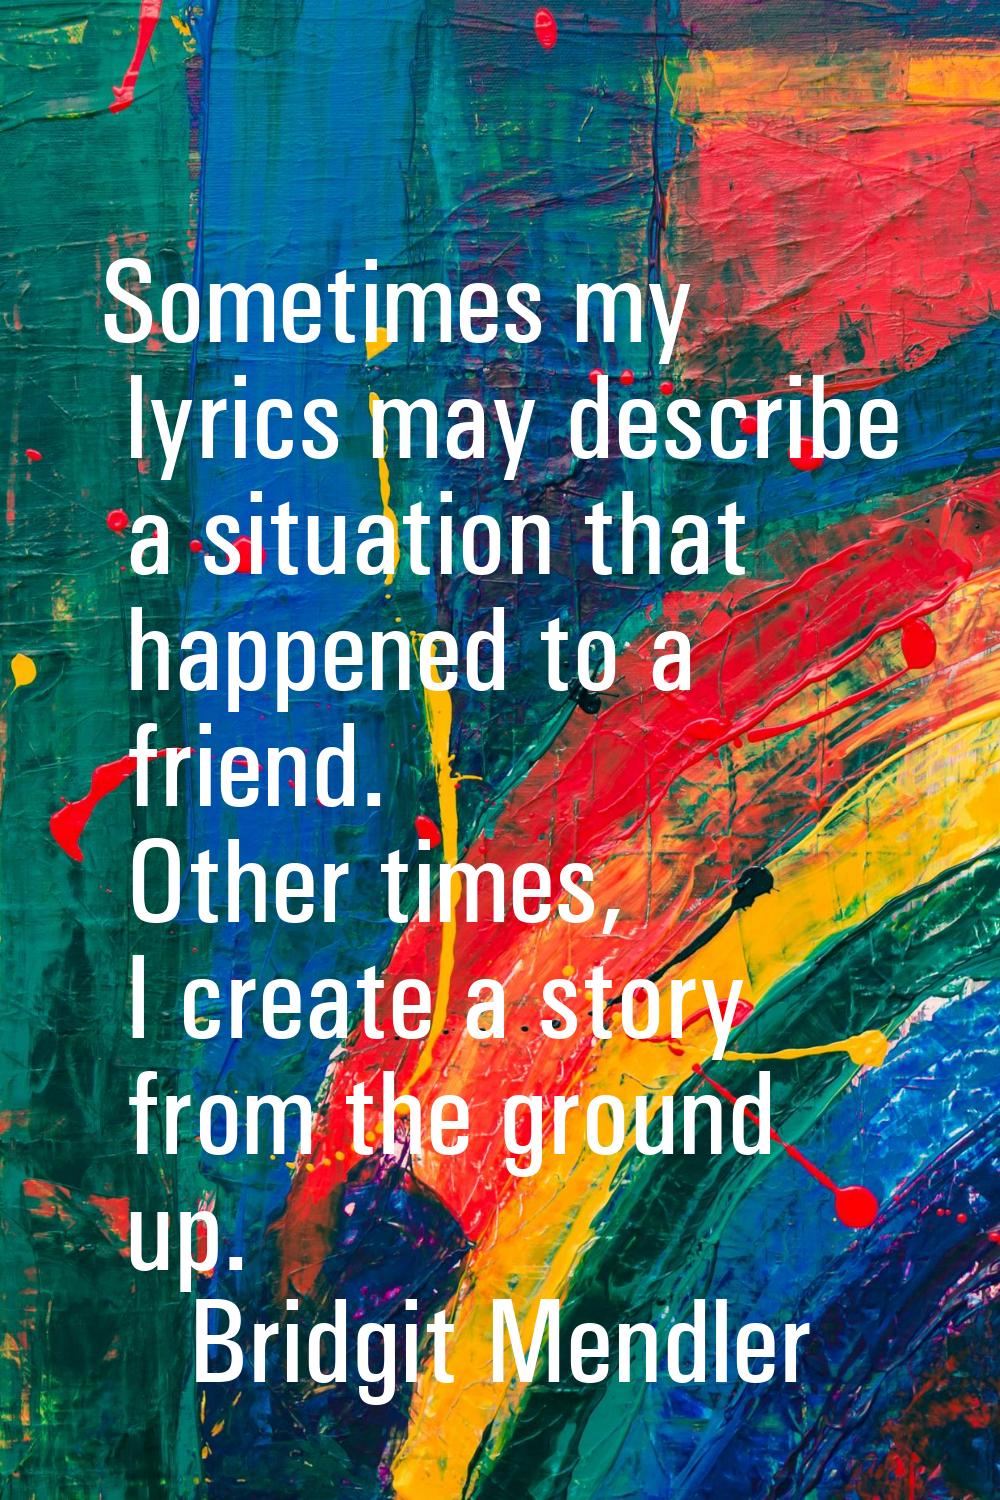 Sometimes my lyrics may describe a situation that happened to a friend. Other times, I create a sto